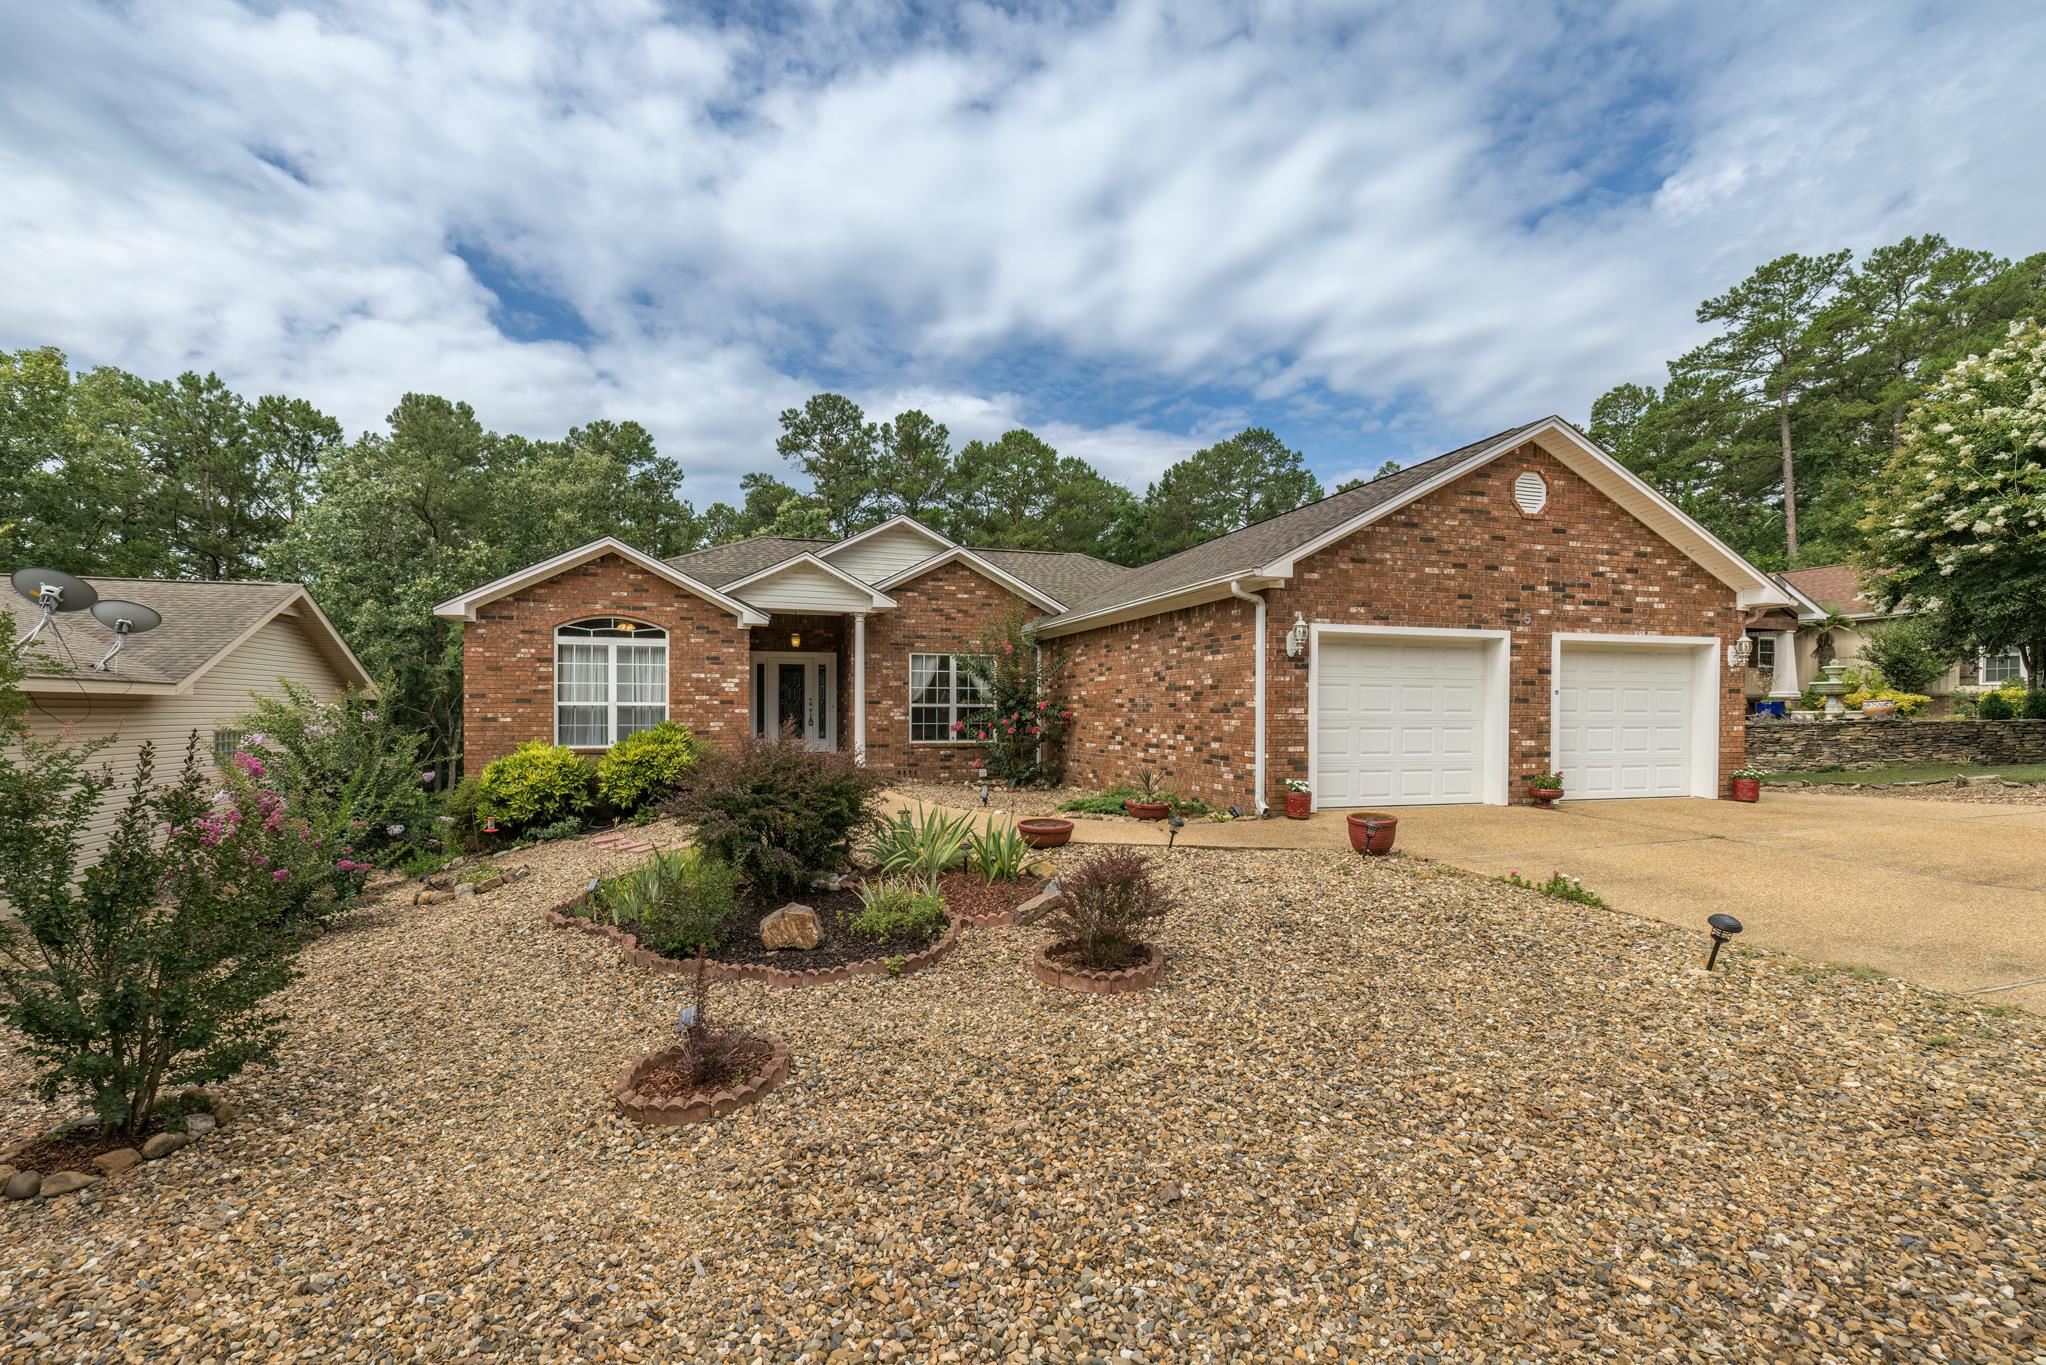 5 Campeon Court, Hot Springs Vill., AR 71909